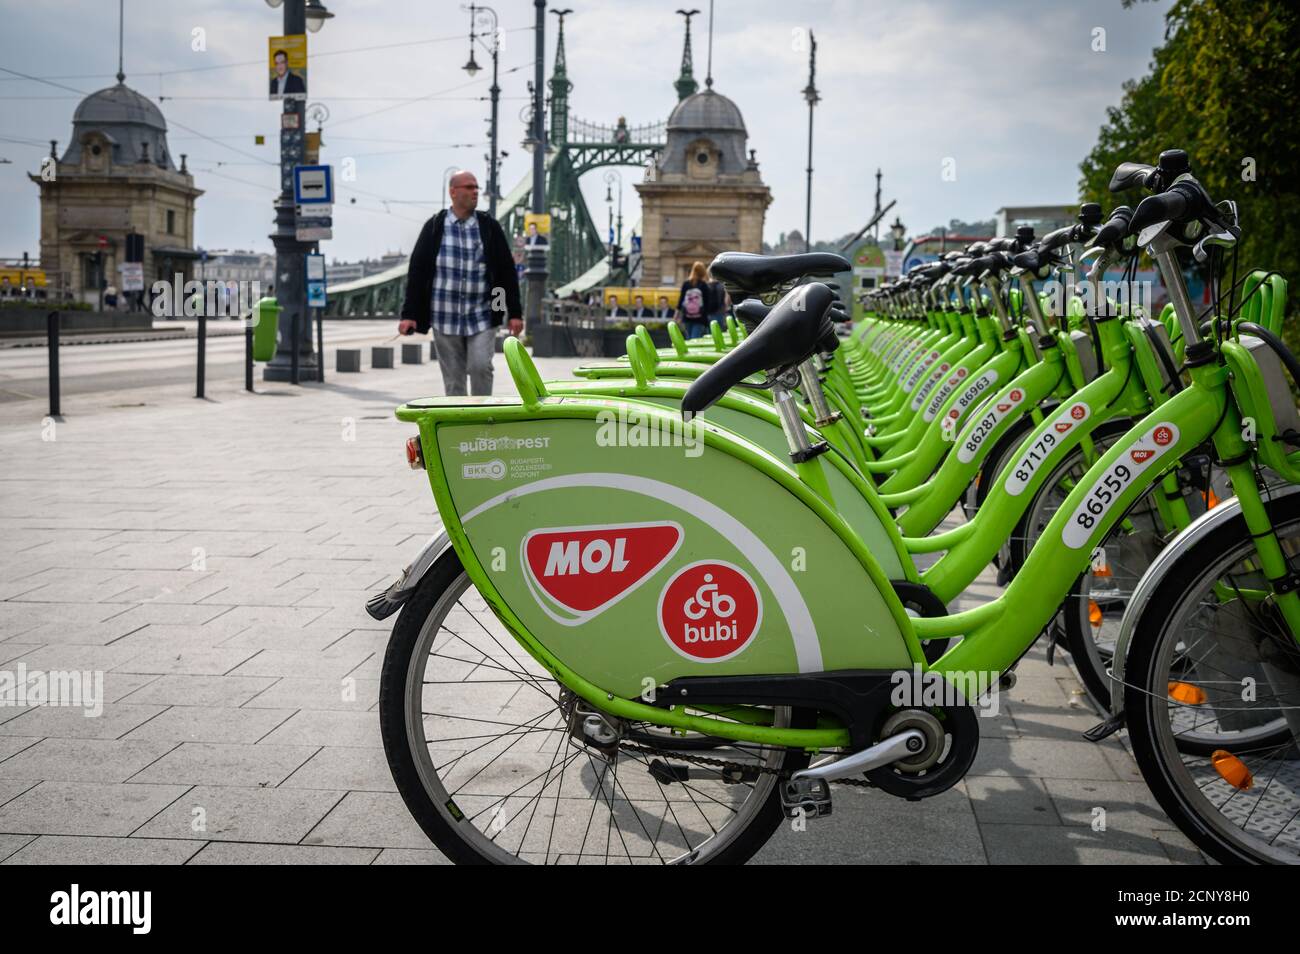 Budapest, Hungary- September 25, 2019: Rental and parking of bicycles in Hungary Stock Photo